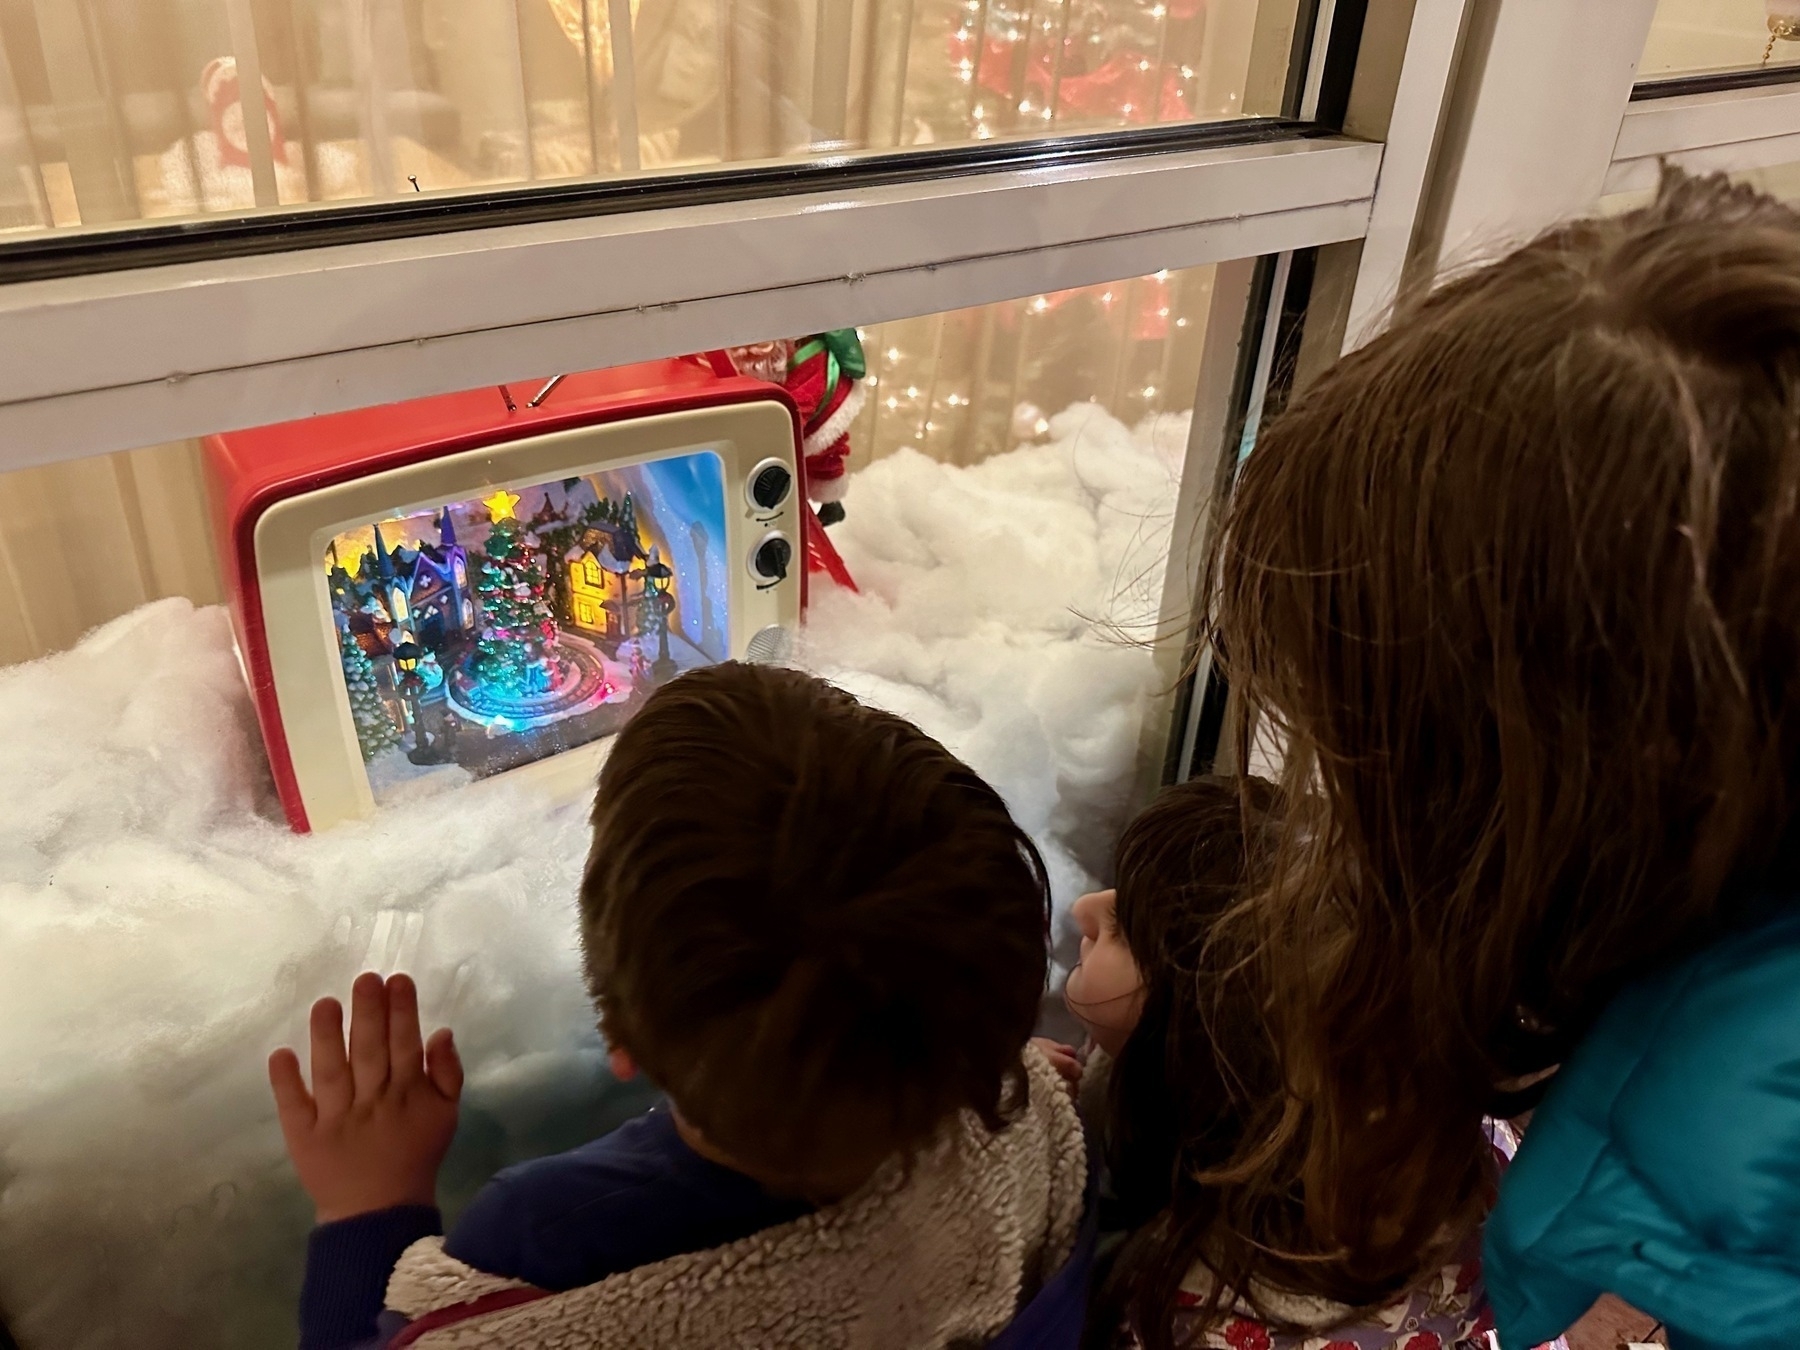 Children looking through a shopping window at a holiday display featuring an old toy TV set with a decorated Christmas tree inside.